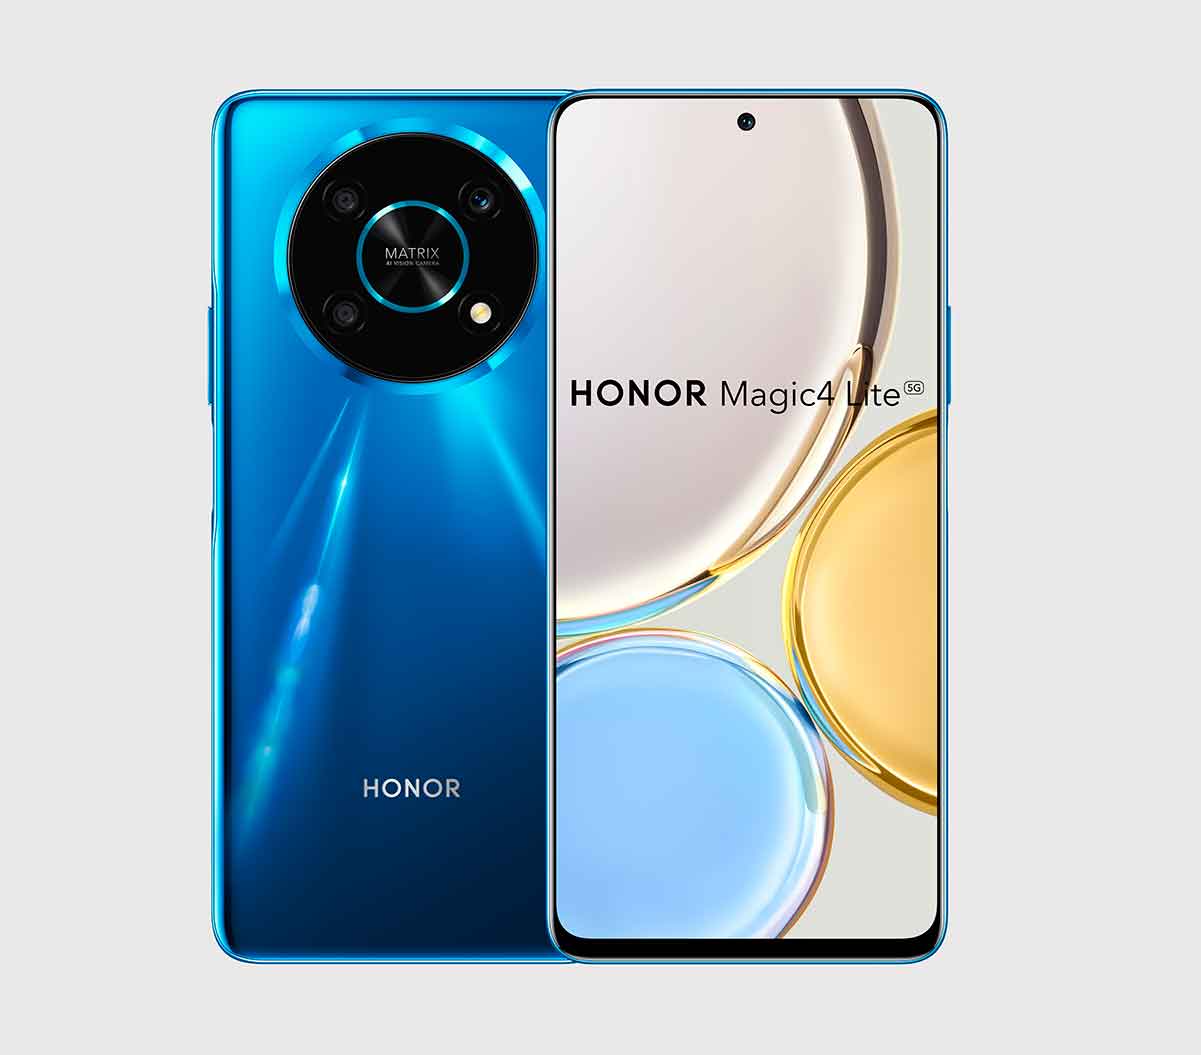 Honor Magic4 Lite 5G: specifications and price